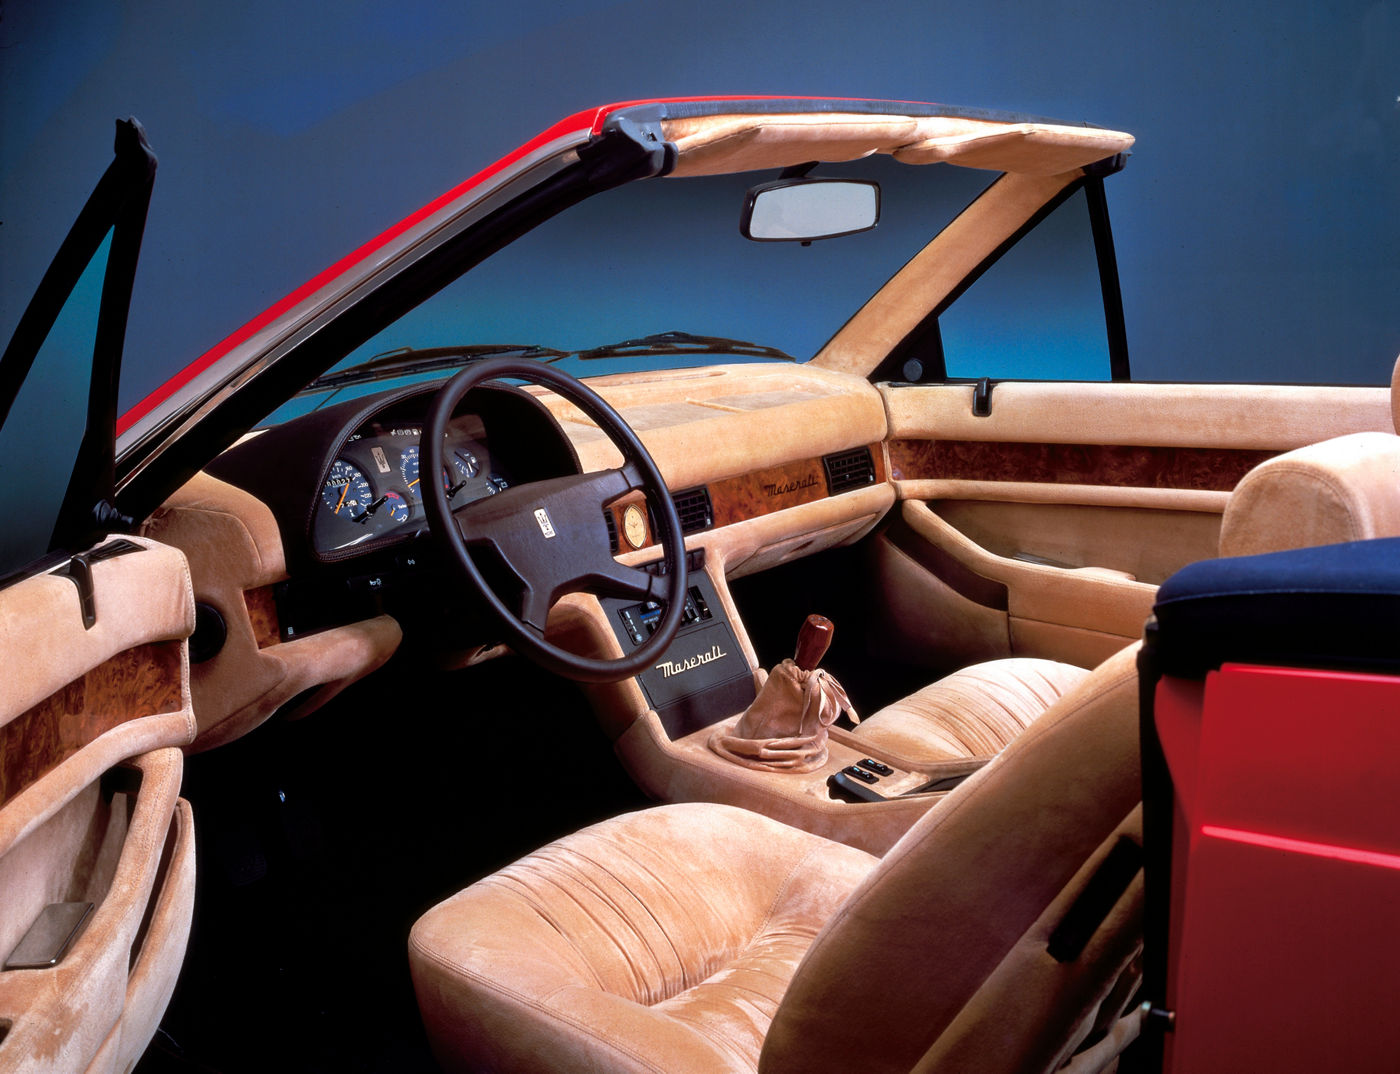 1989 Maserati Biturbo Spyder - interior view of the classic cabriolet model in red